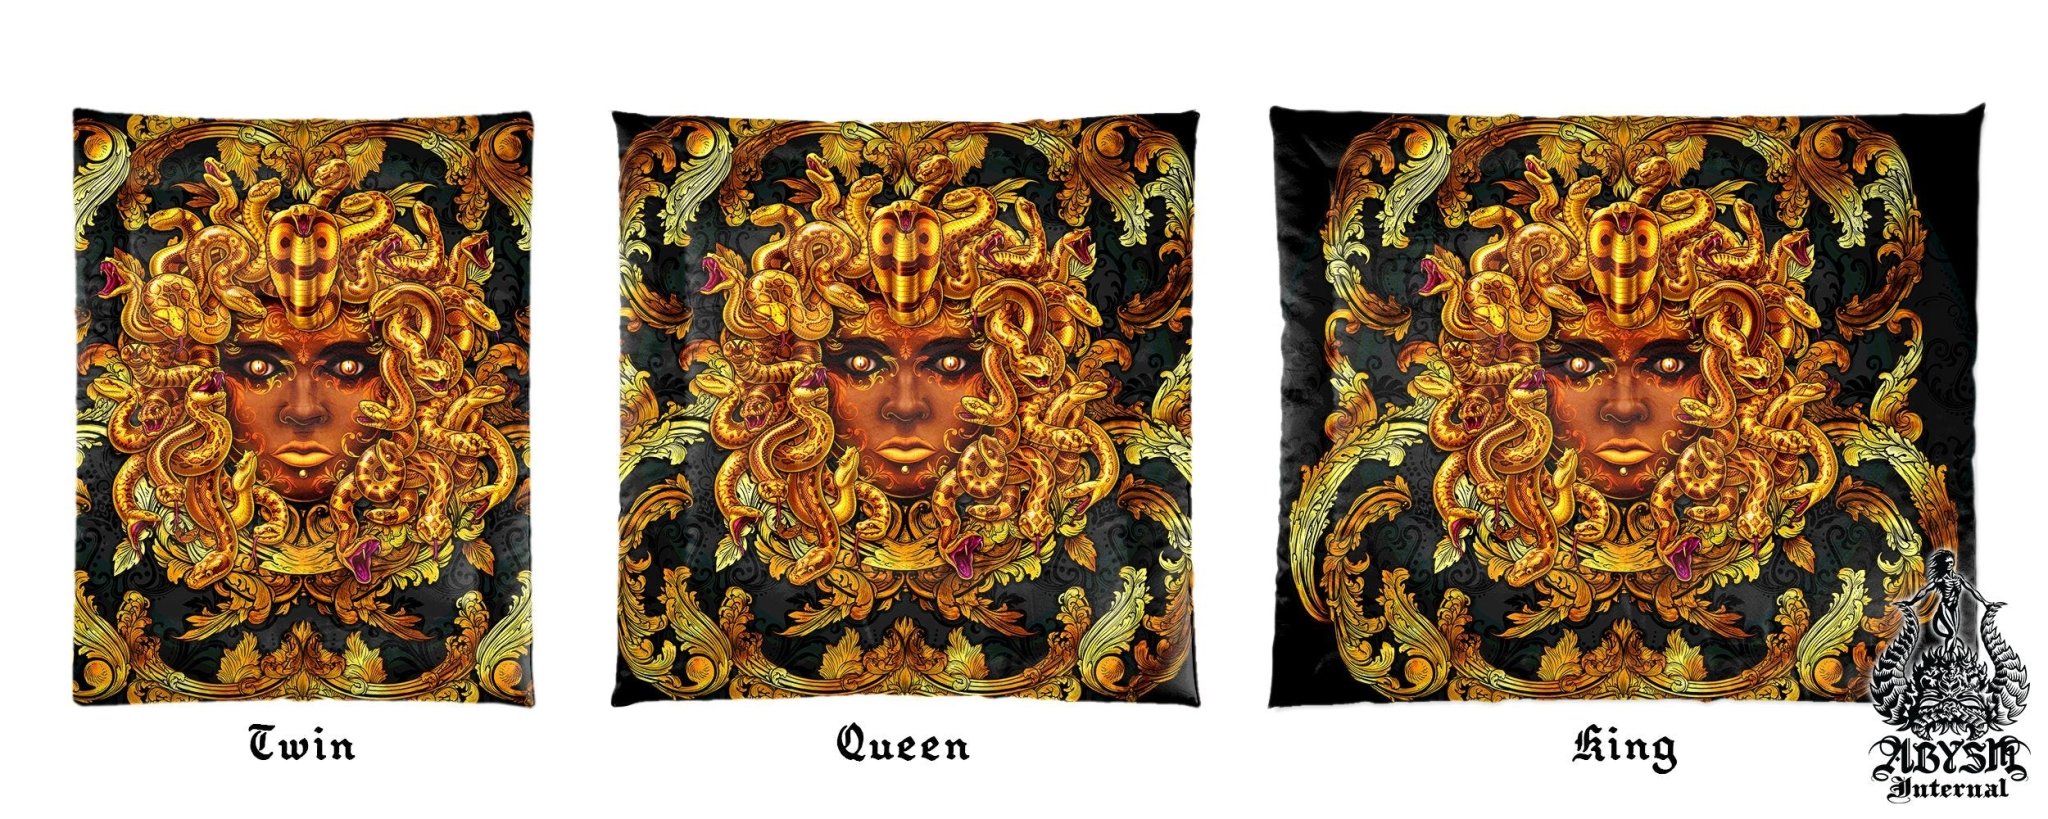 Medusa Bedding Set, Comforter and Duvet, Victorian Gothic Bed Cover and Bedroom Decor, King, Queen and Twin Size - Gold - Abysm Internal